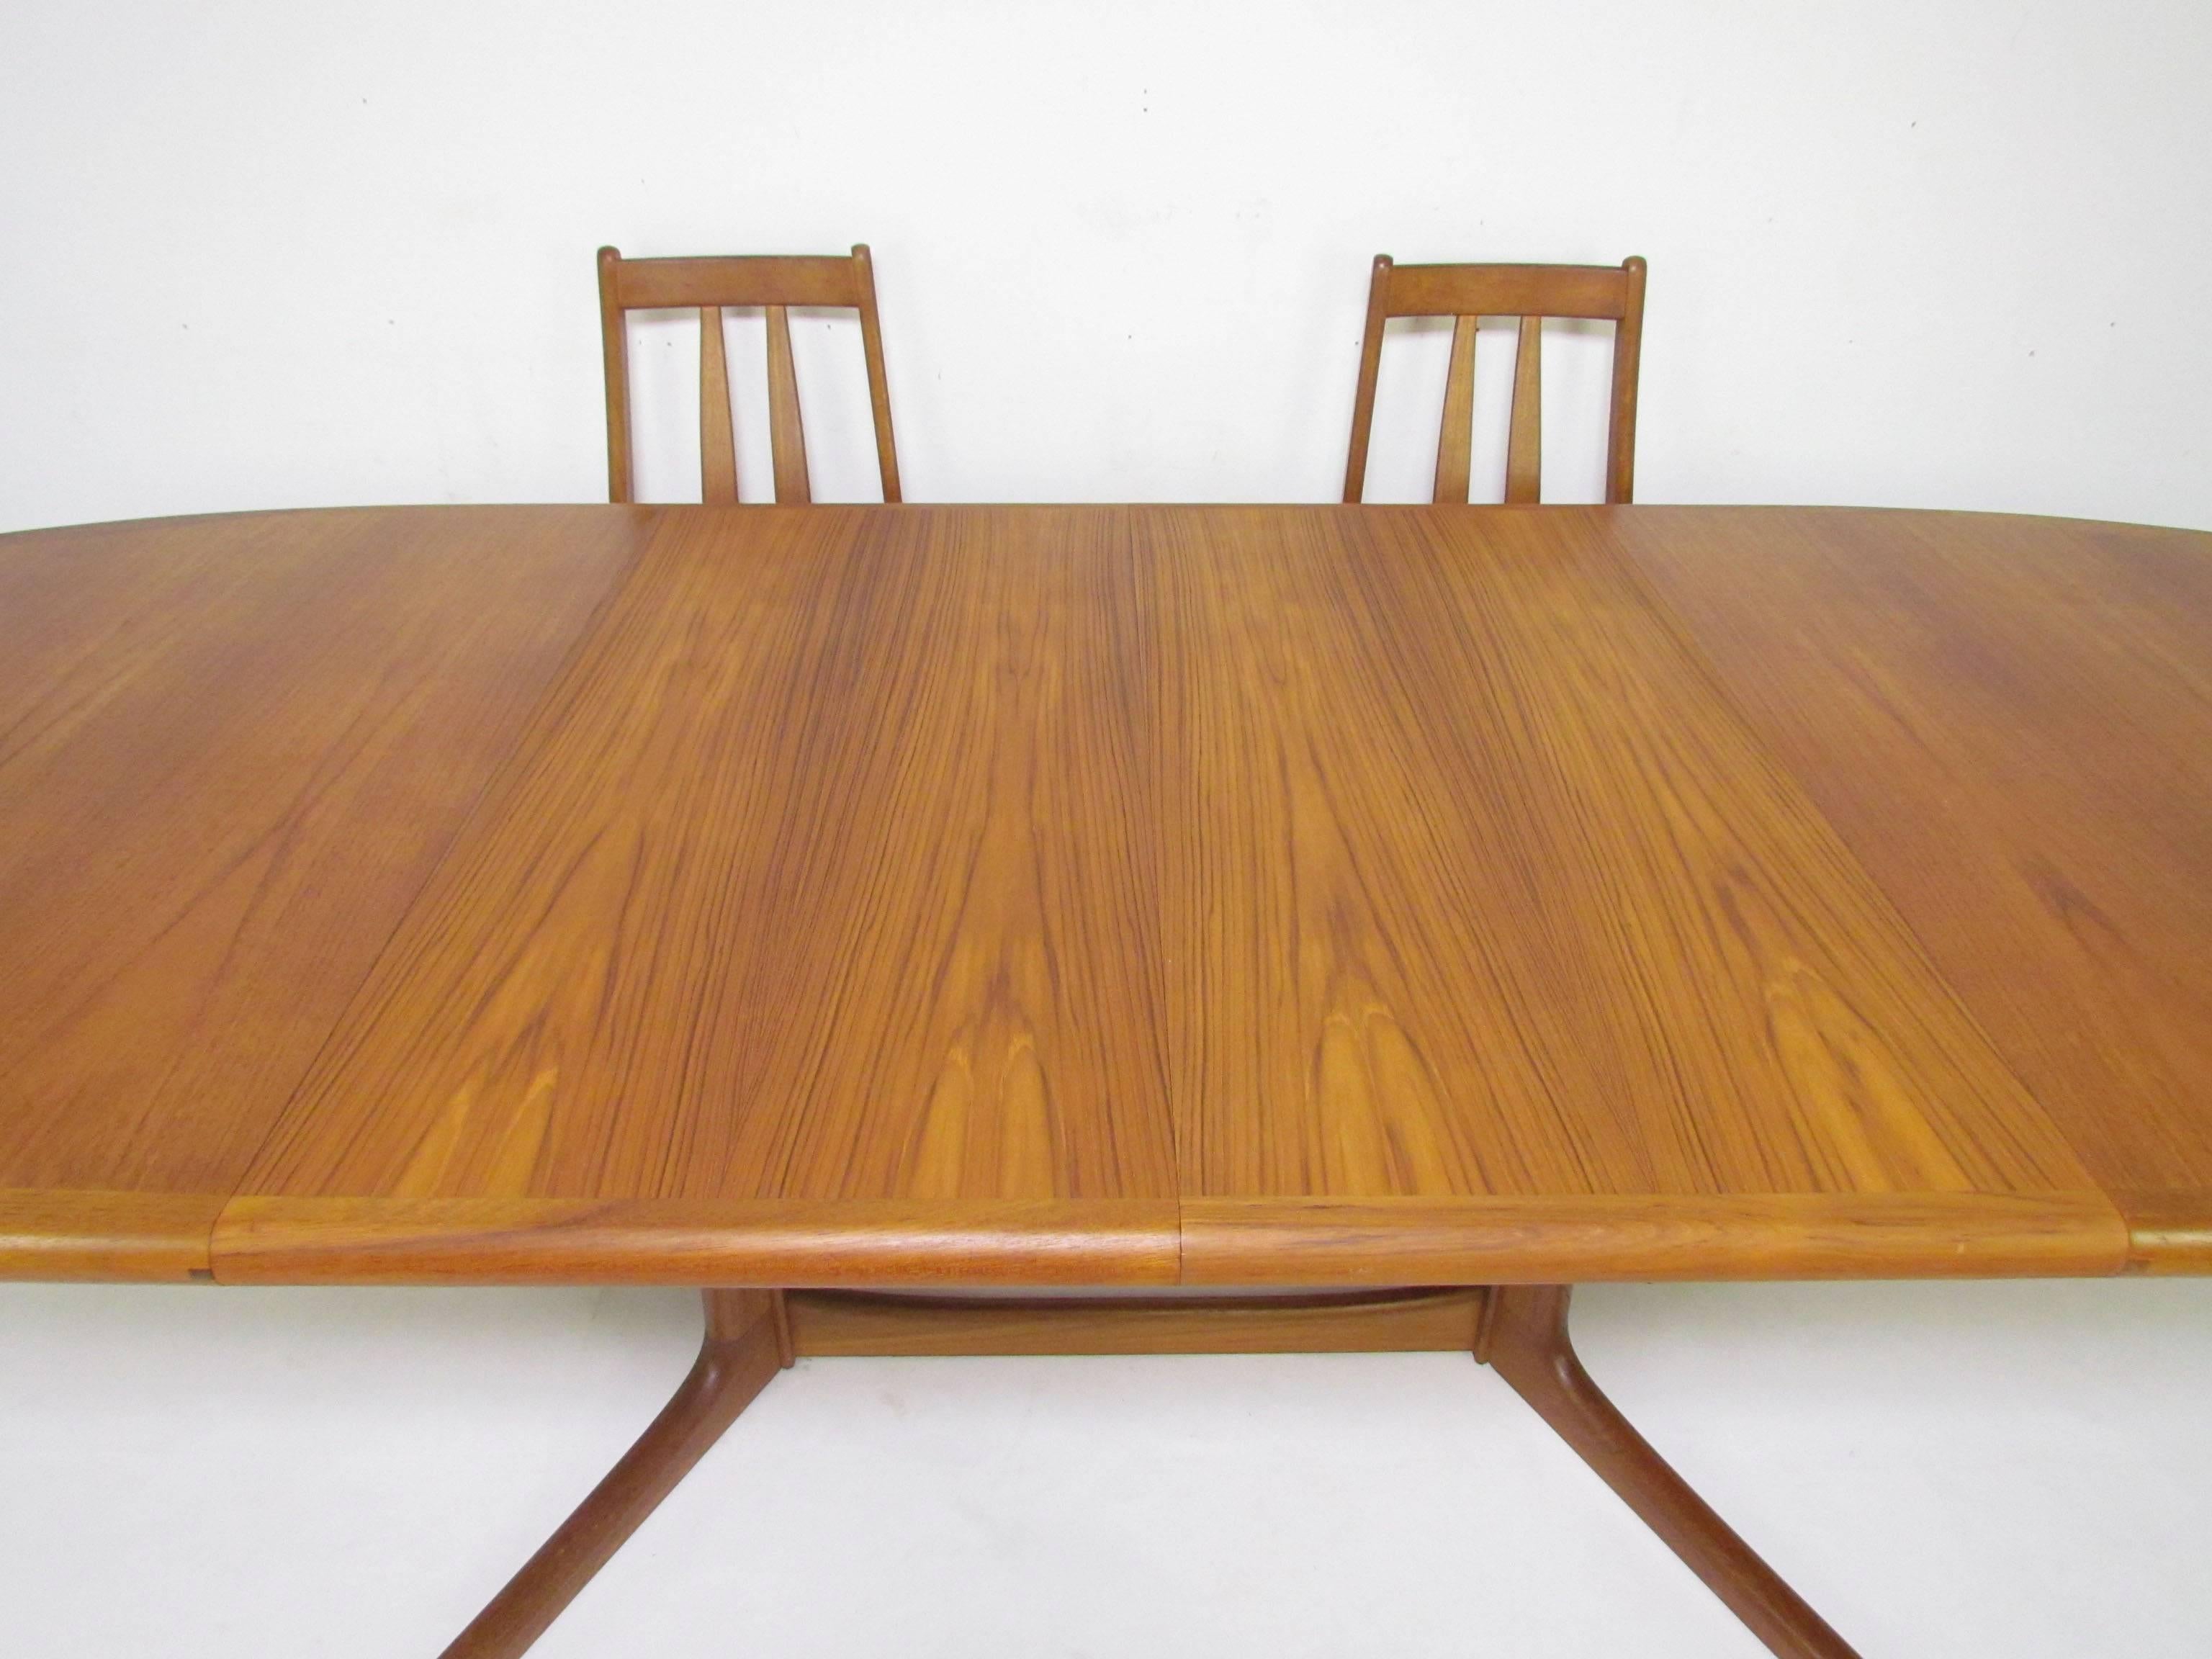 Late 20th Century Danish Teak Dining Set, Expandable Oval Table and Six Chairs, circa 1970s